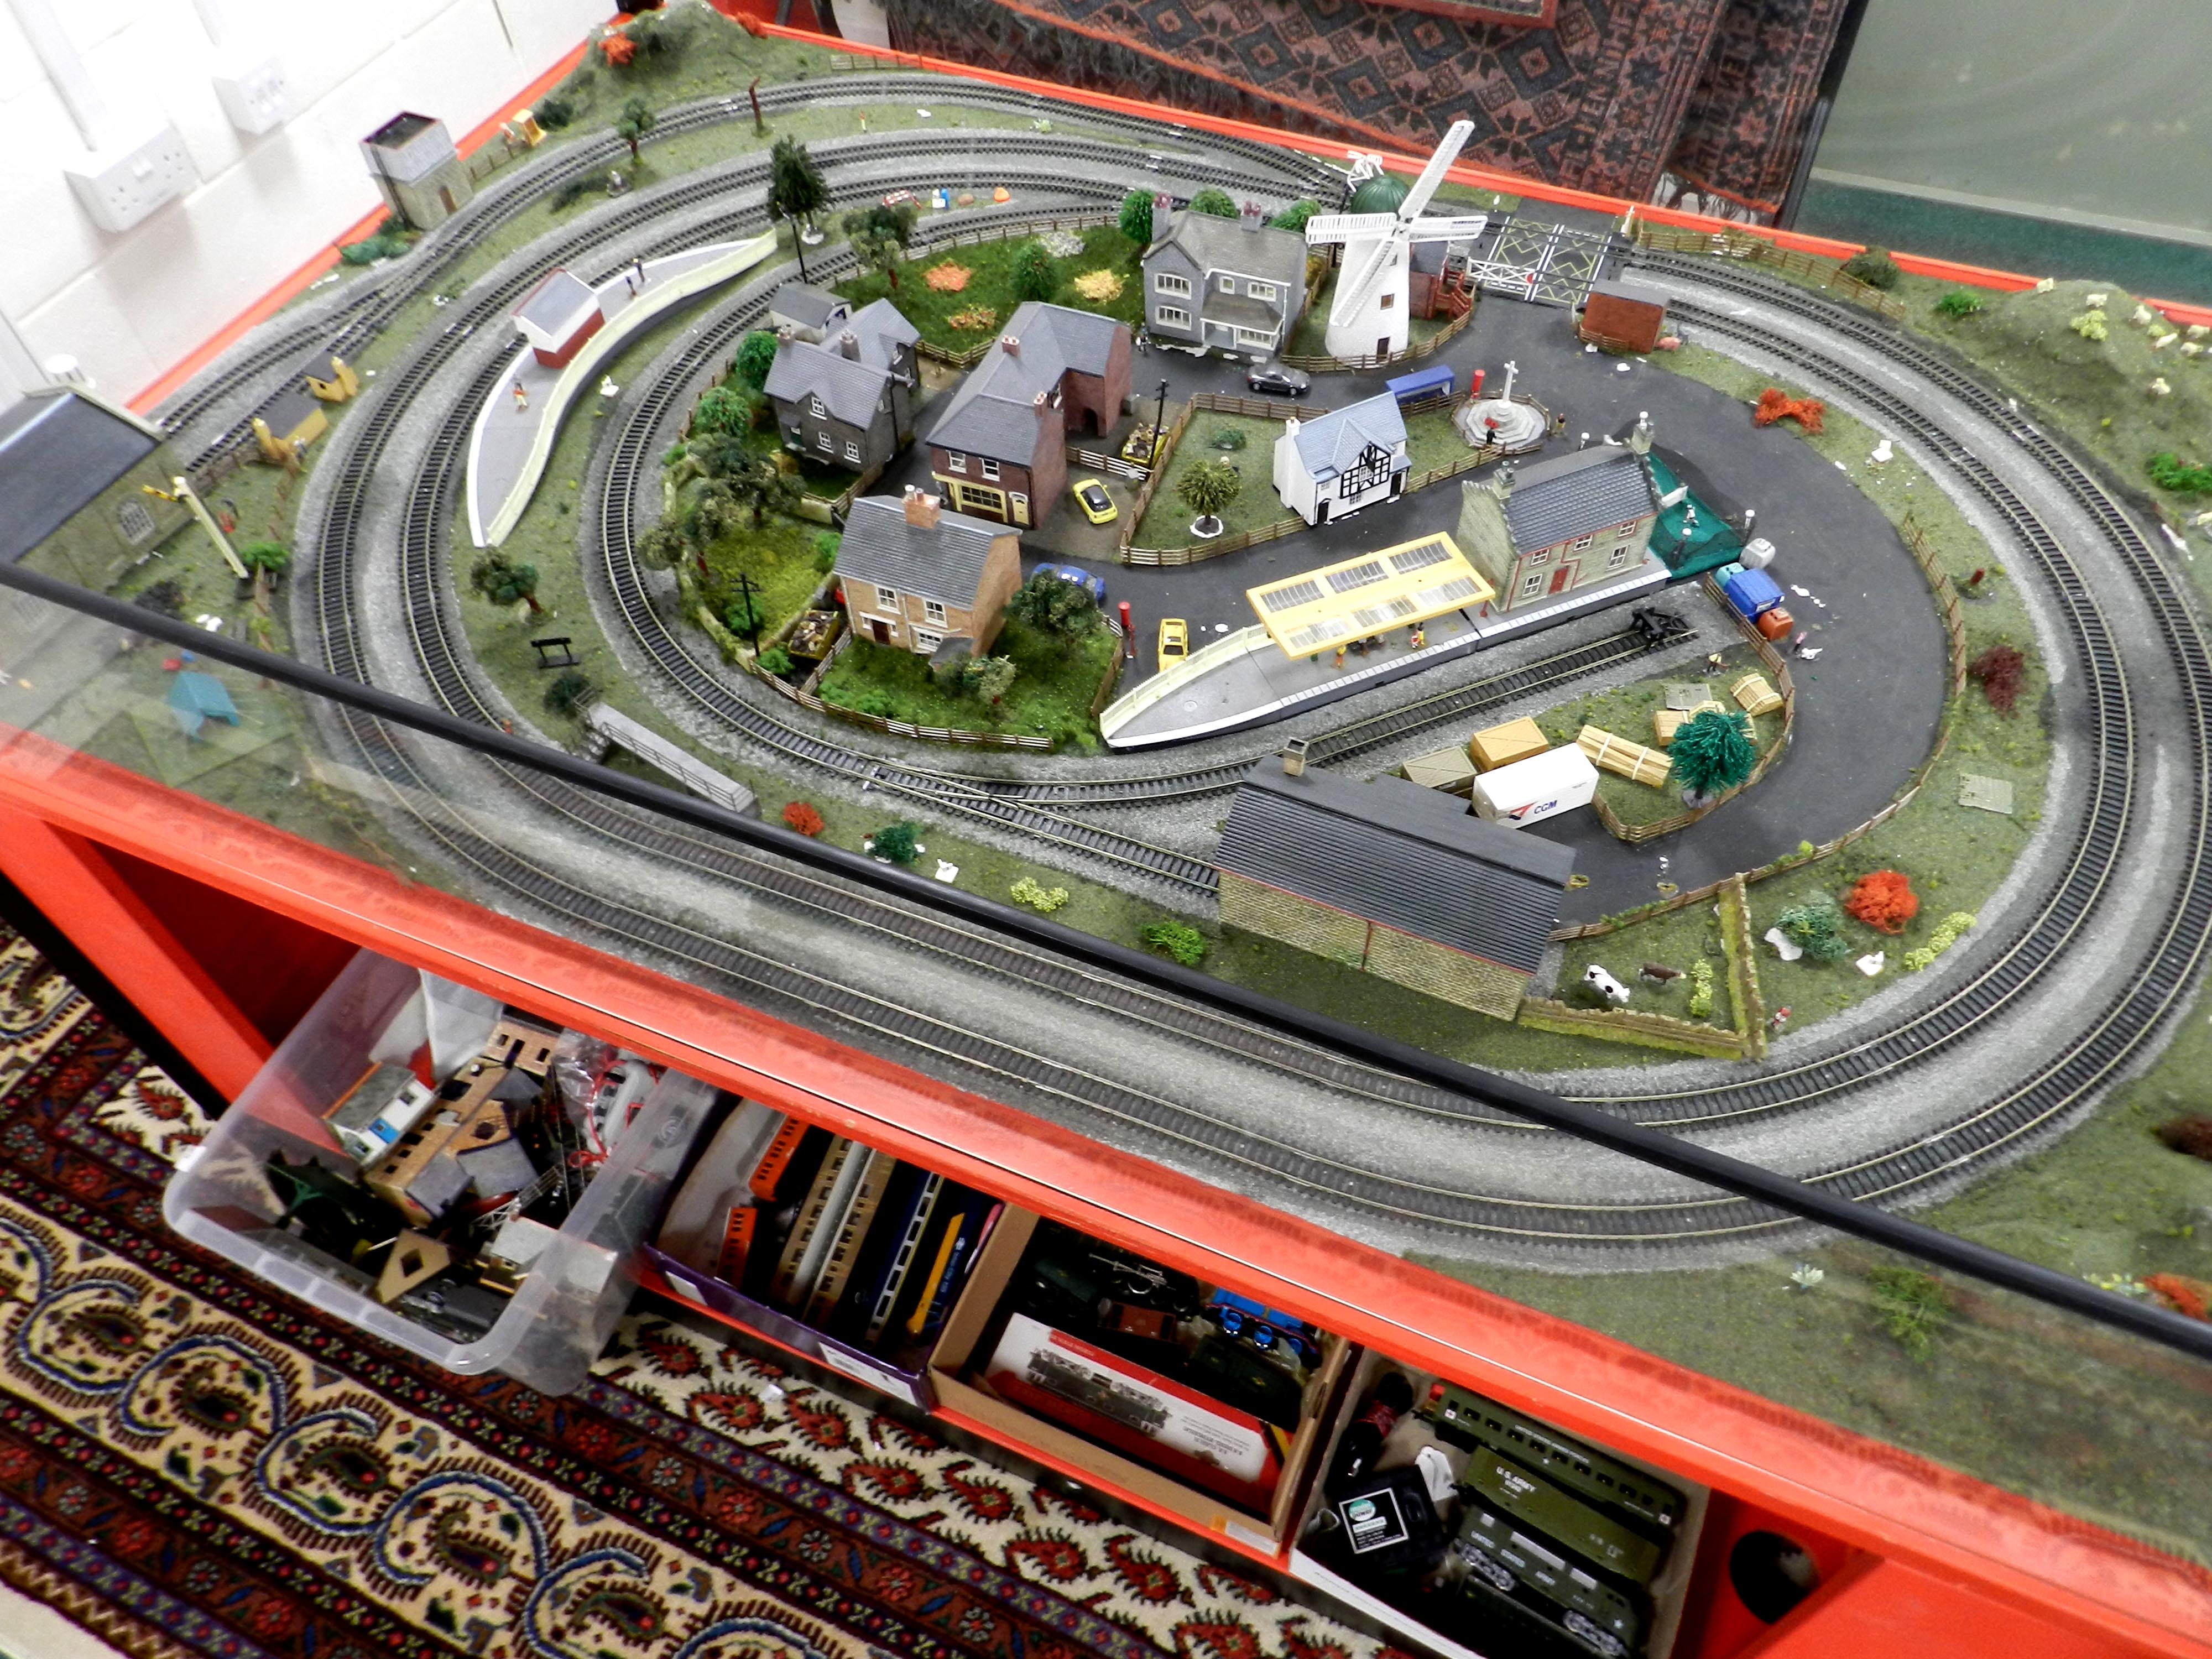 Hornby ex-shop Display Train Layout, Skaledale buildings, Trains and Accessories - Image 3 of 5